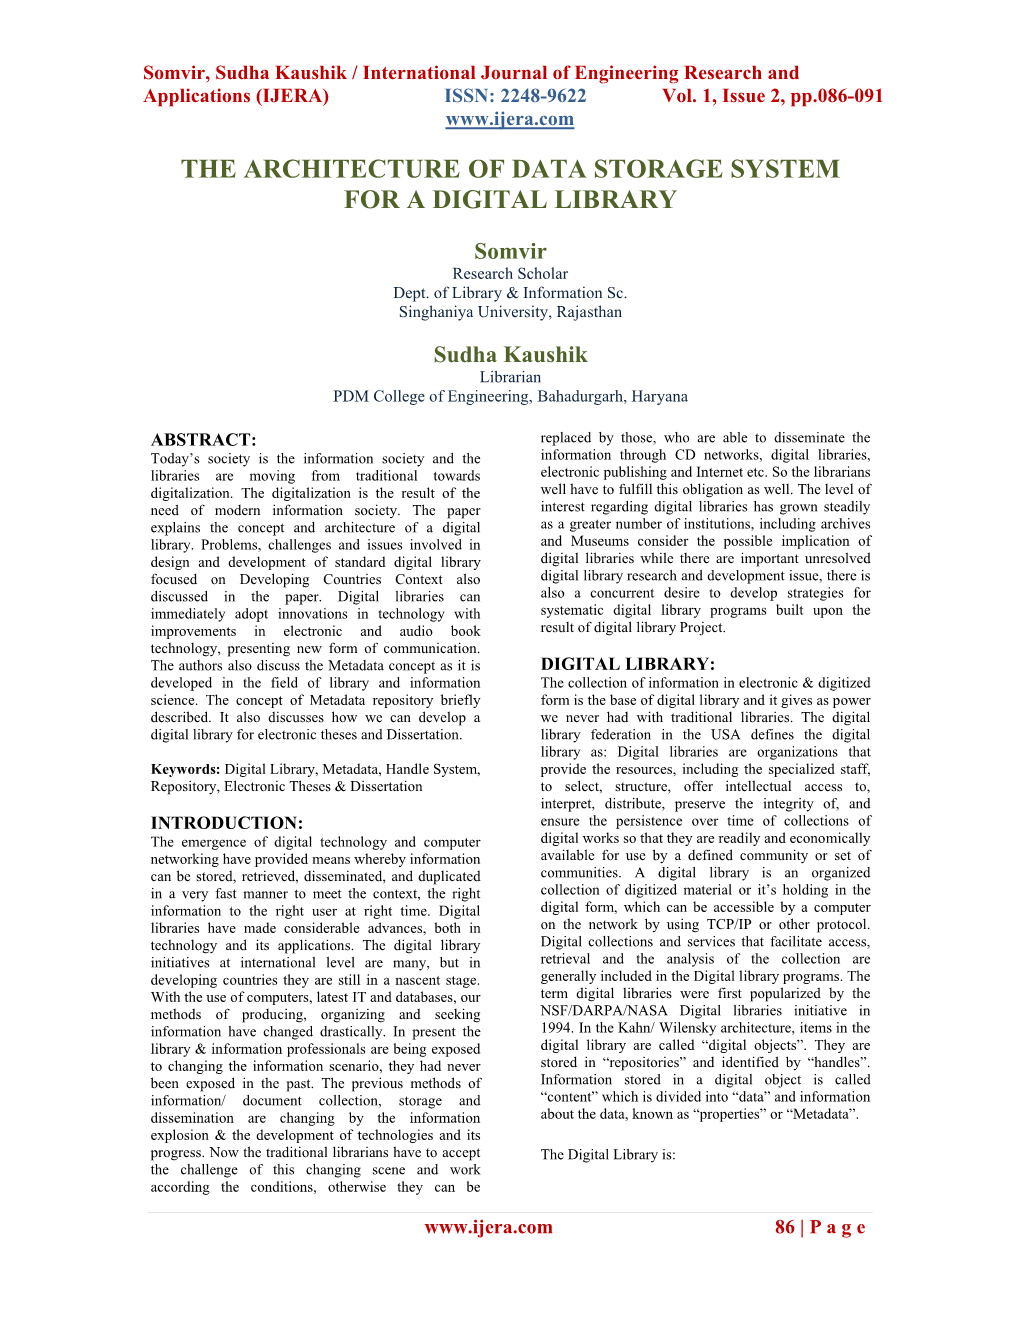 The Architecture of Data Storage System for a Digital Library